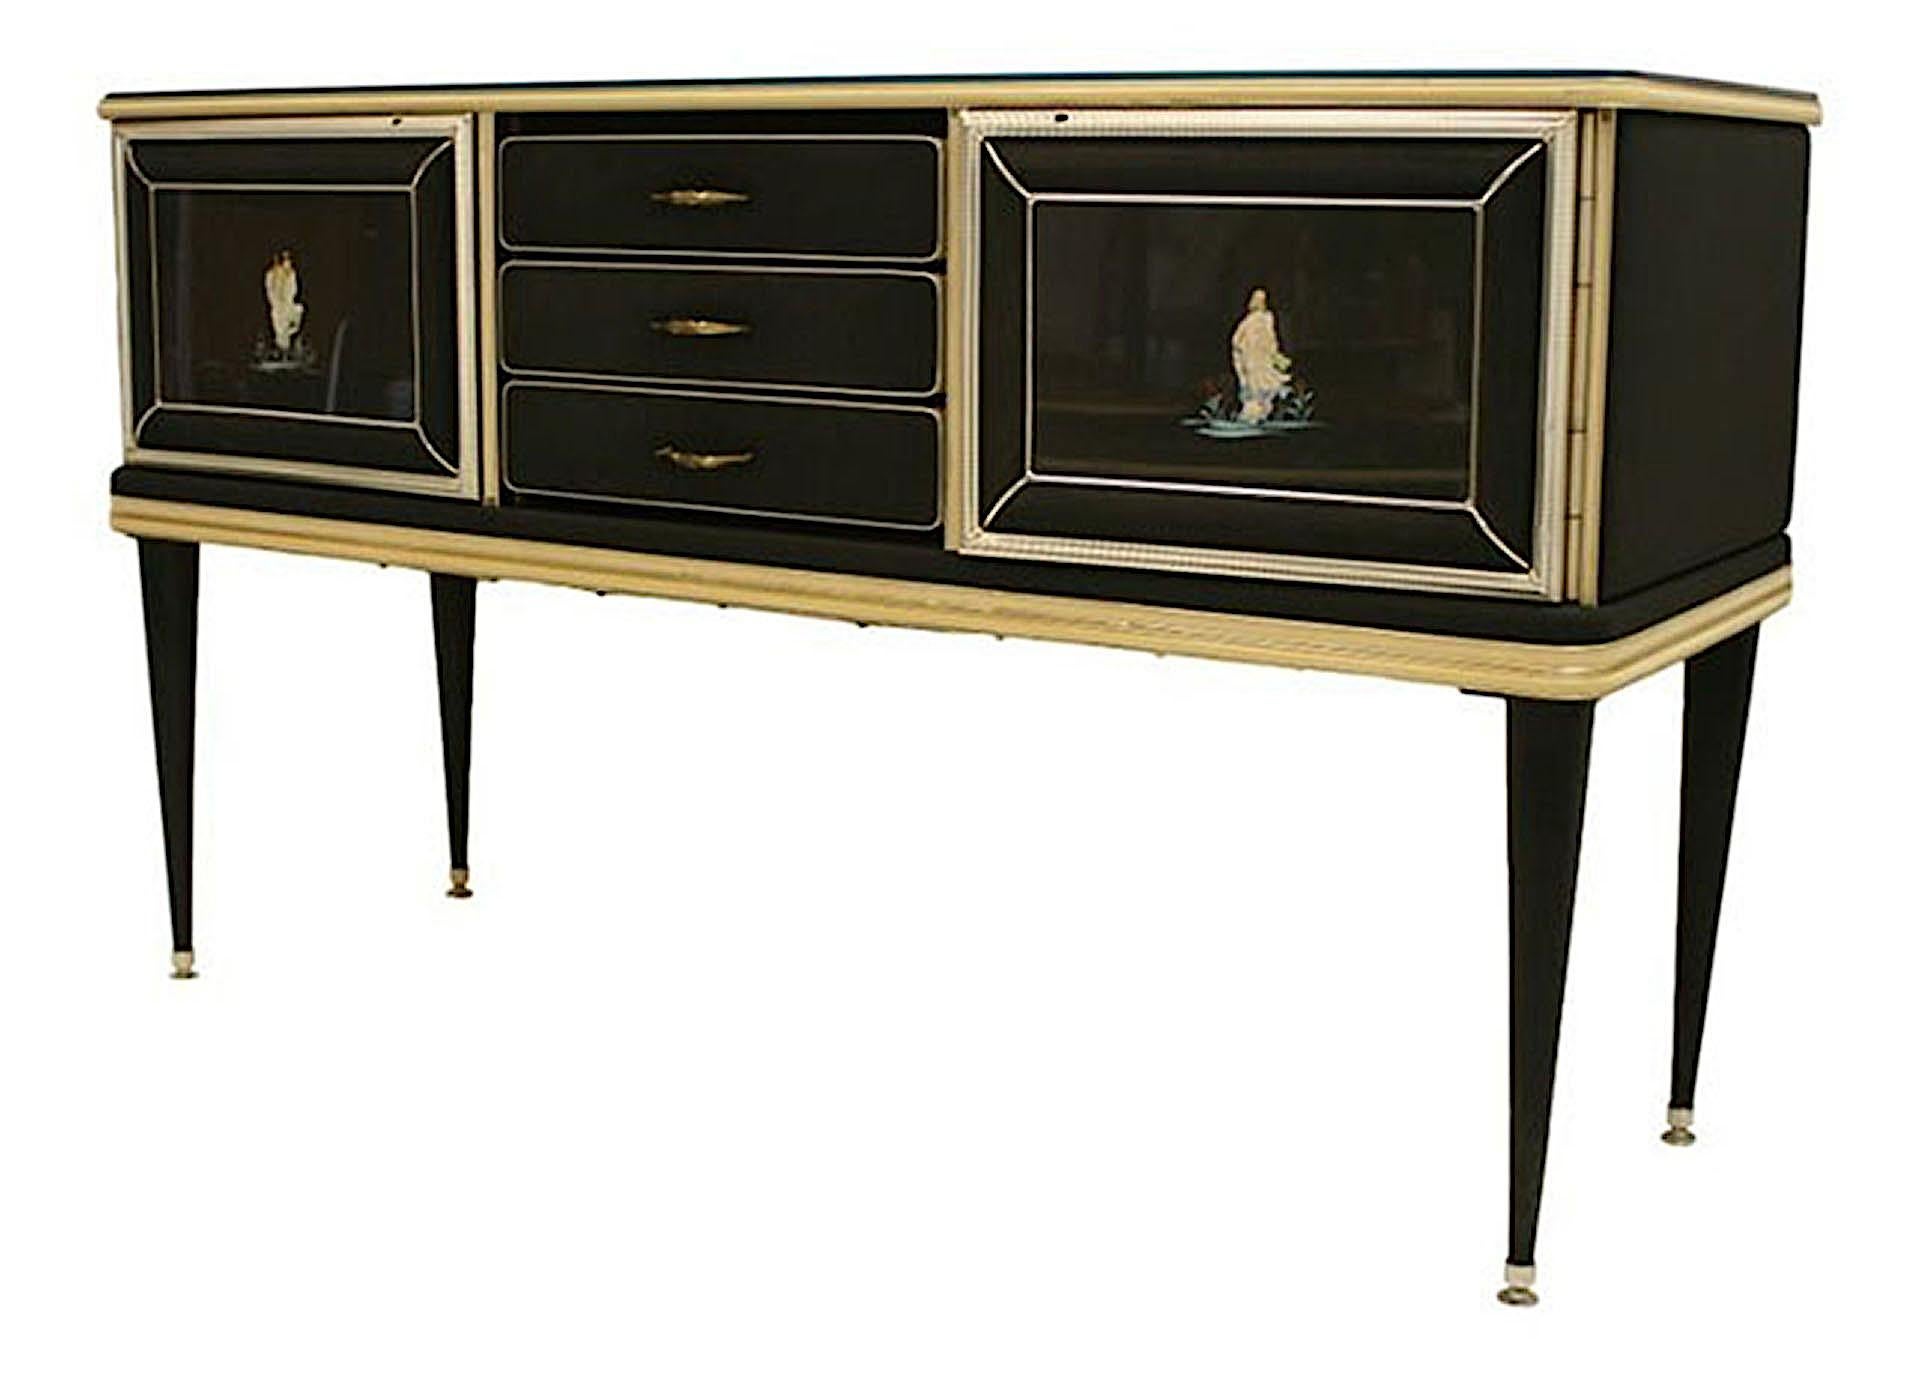 Italian Mid-Century (1950s) chinoiserie decorated sideboard covered in a black faux leather (skai) and trimmed with anodized aluminum with 2 doors separated by 3 drawers (by UMBERTO MASCAGNI)
